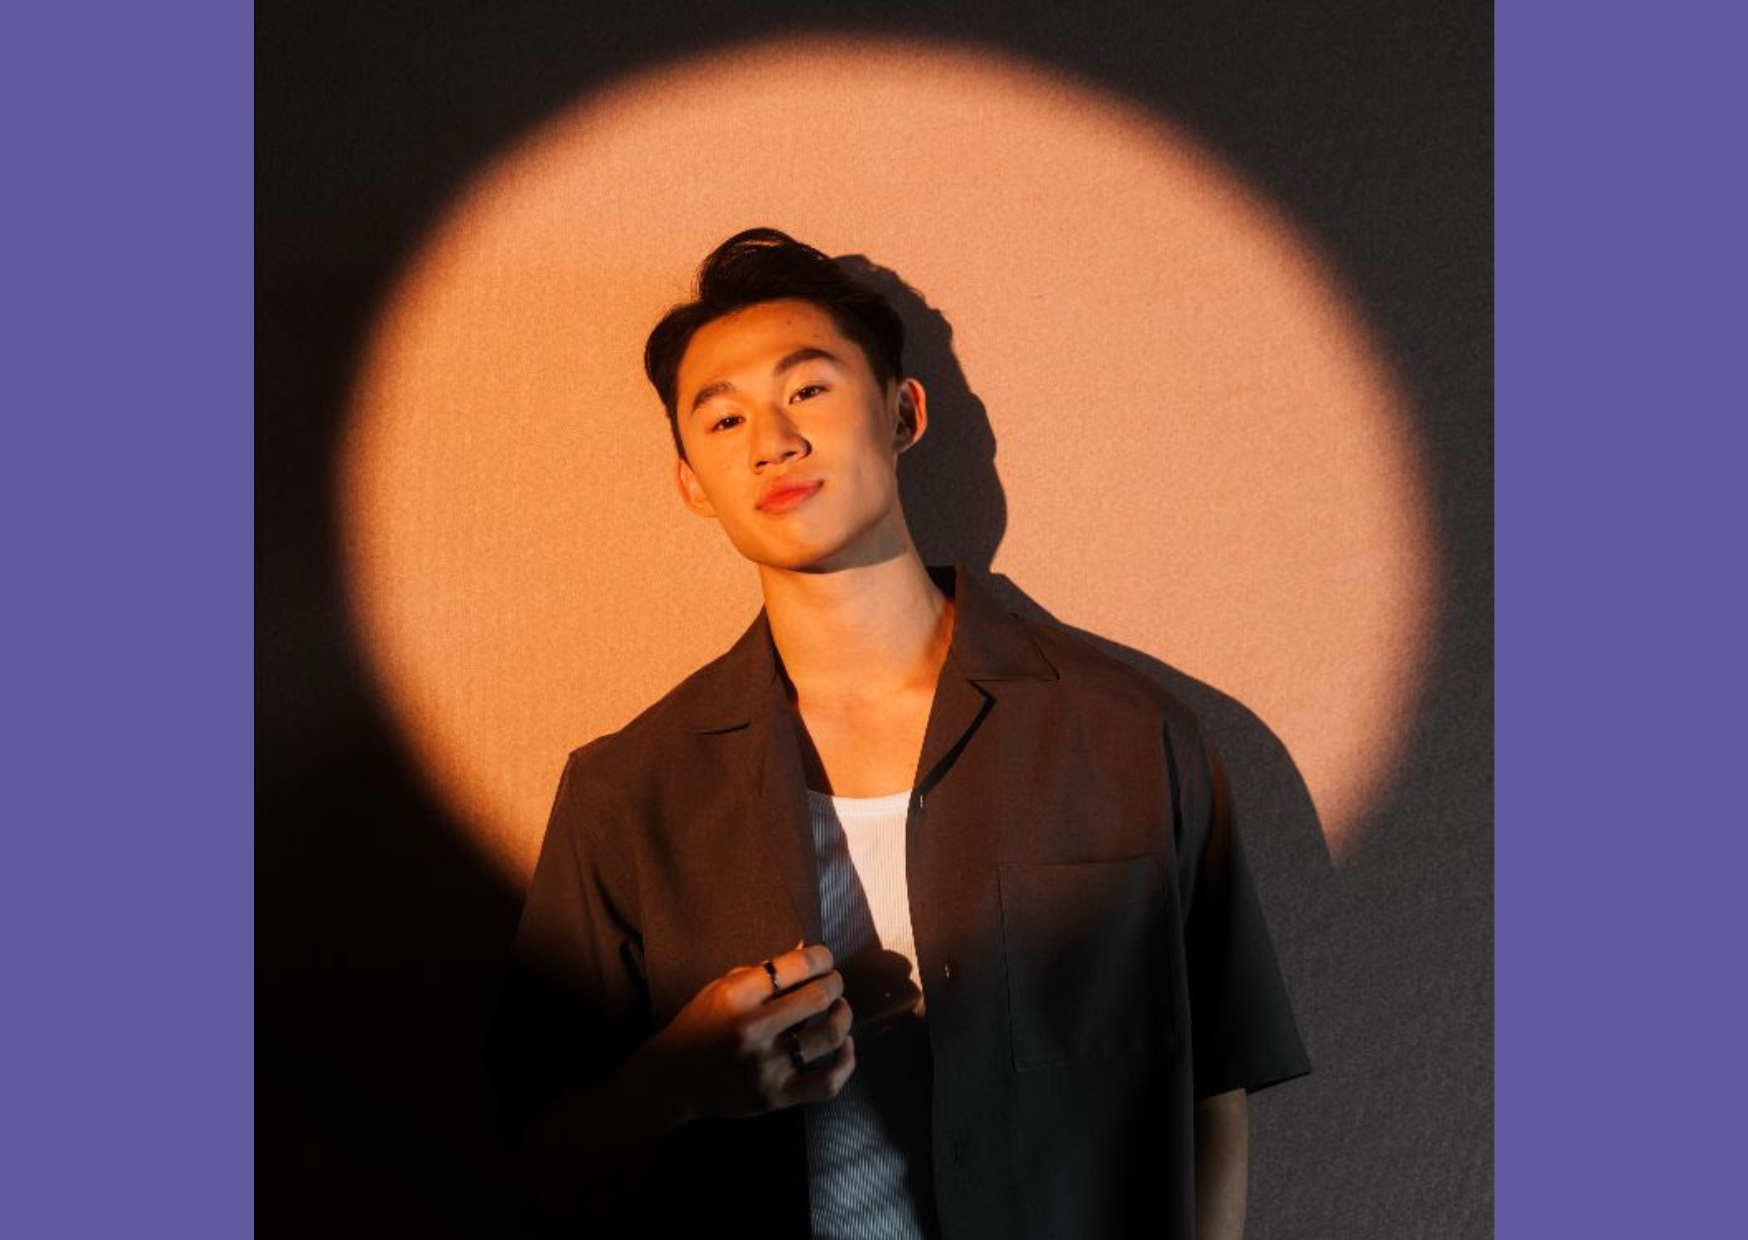 Rising Asian Singer-Songwriter Thomas Ng Drops New Track, "Heart on Fire"